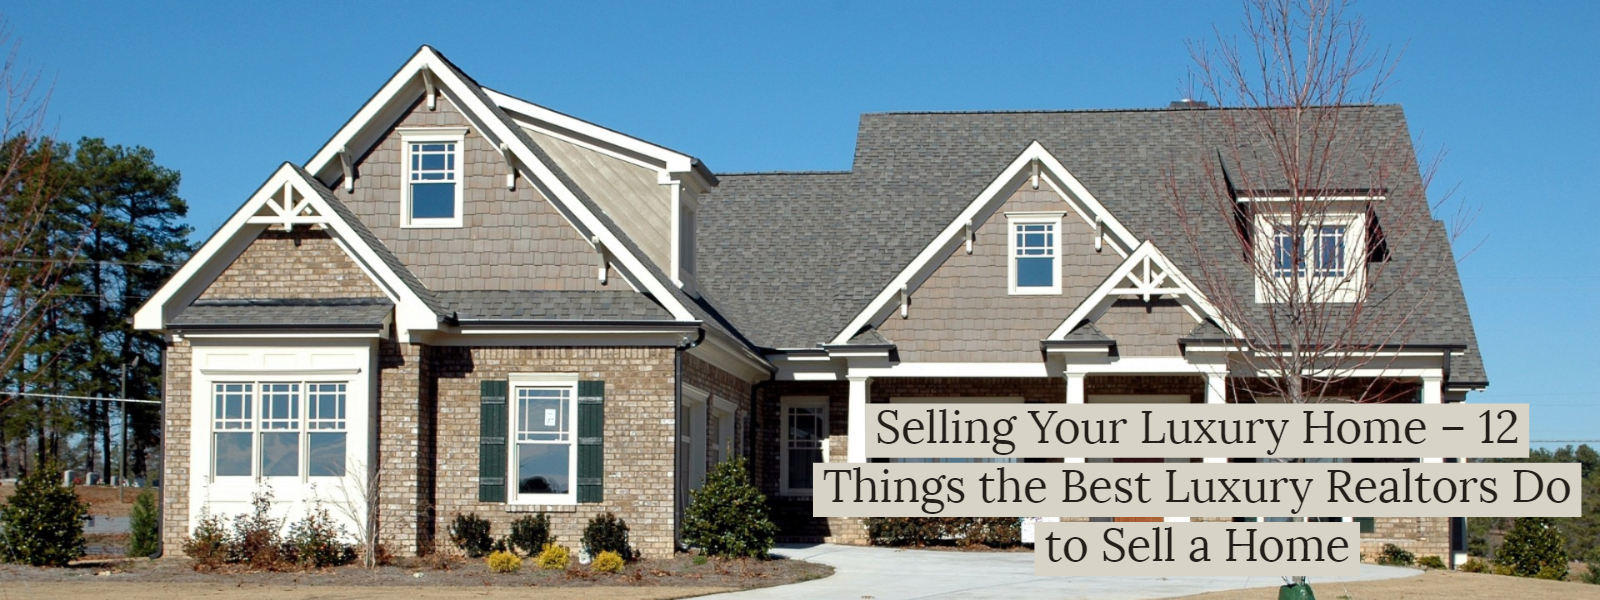 Selling Your Luxury Home – 12 Things the Best Luxury Realtors Do to Sell a Home